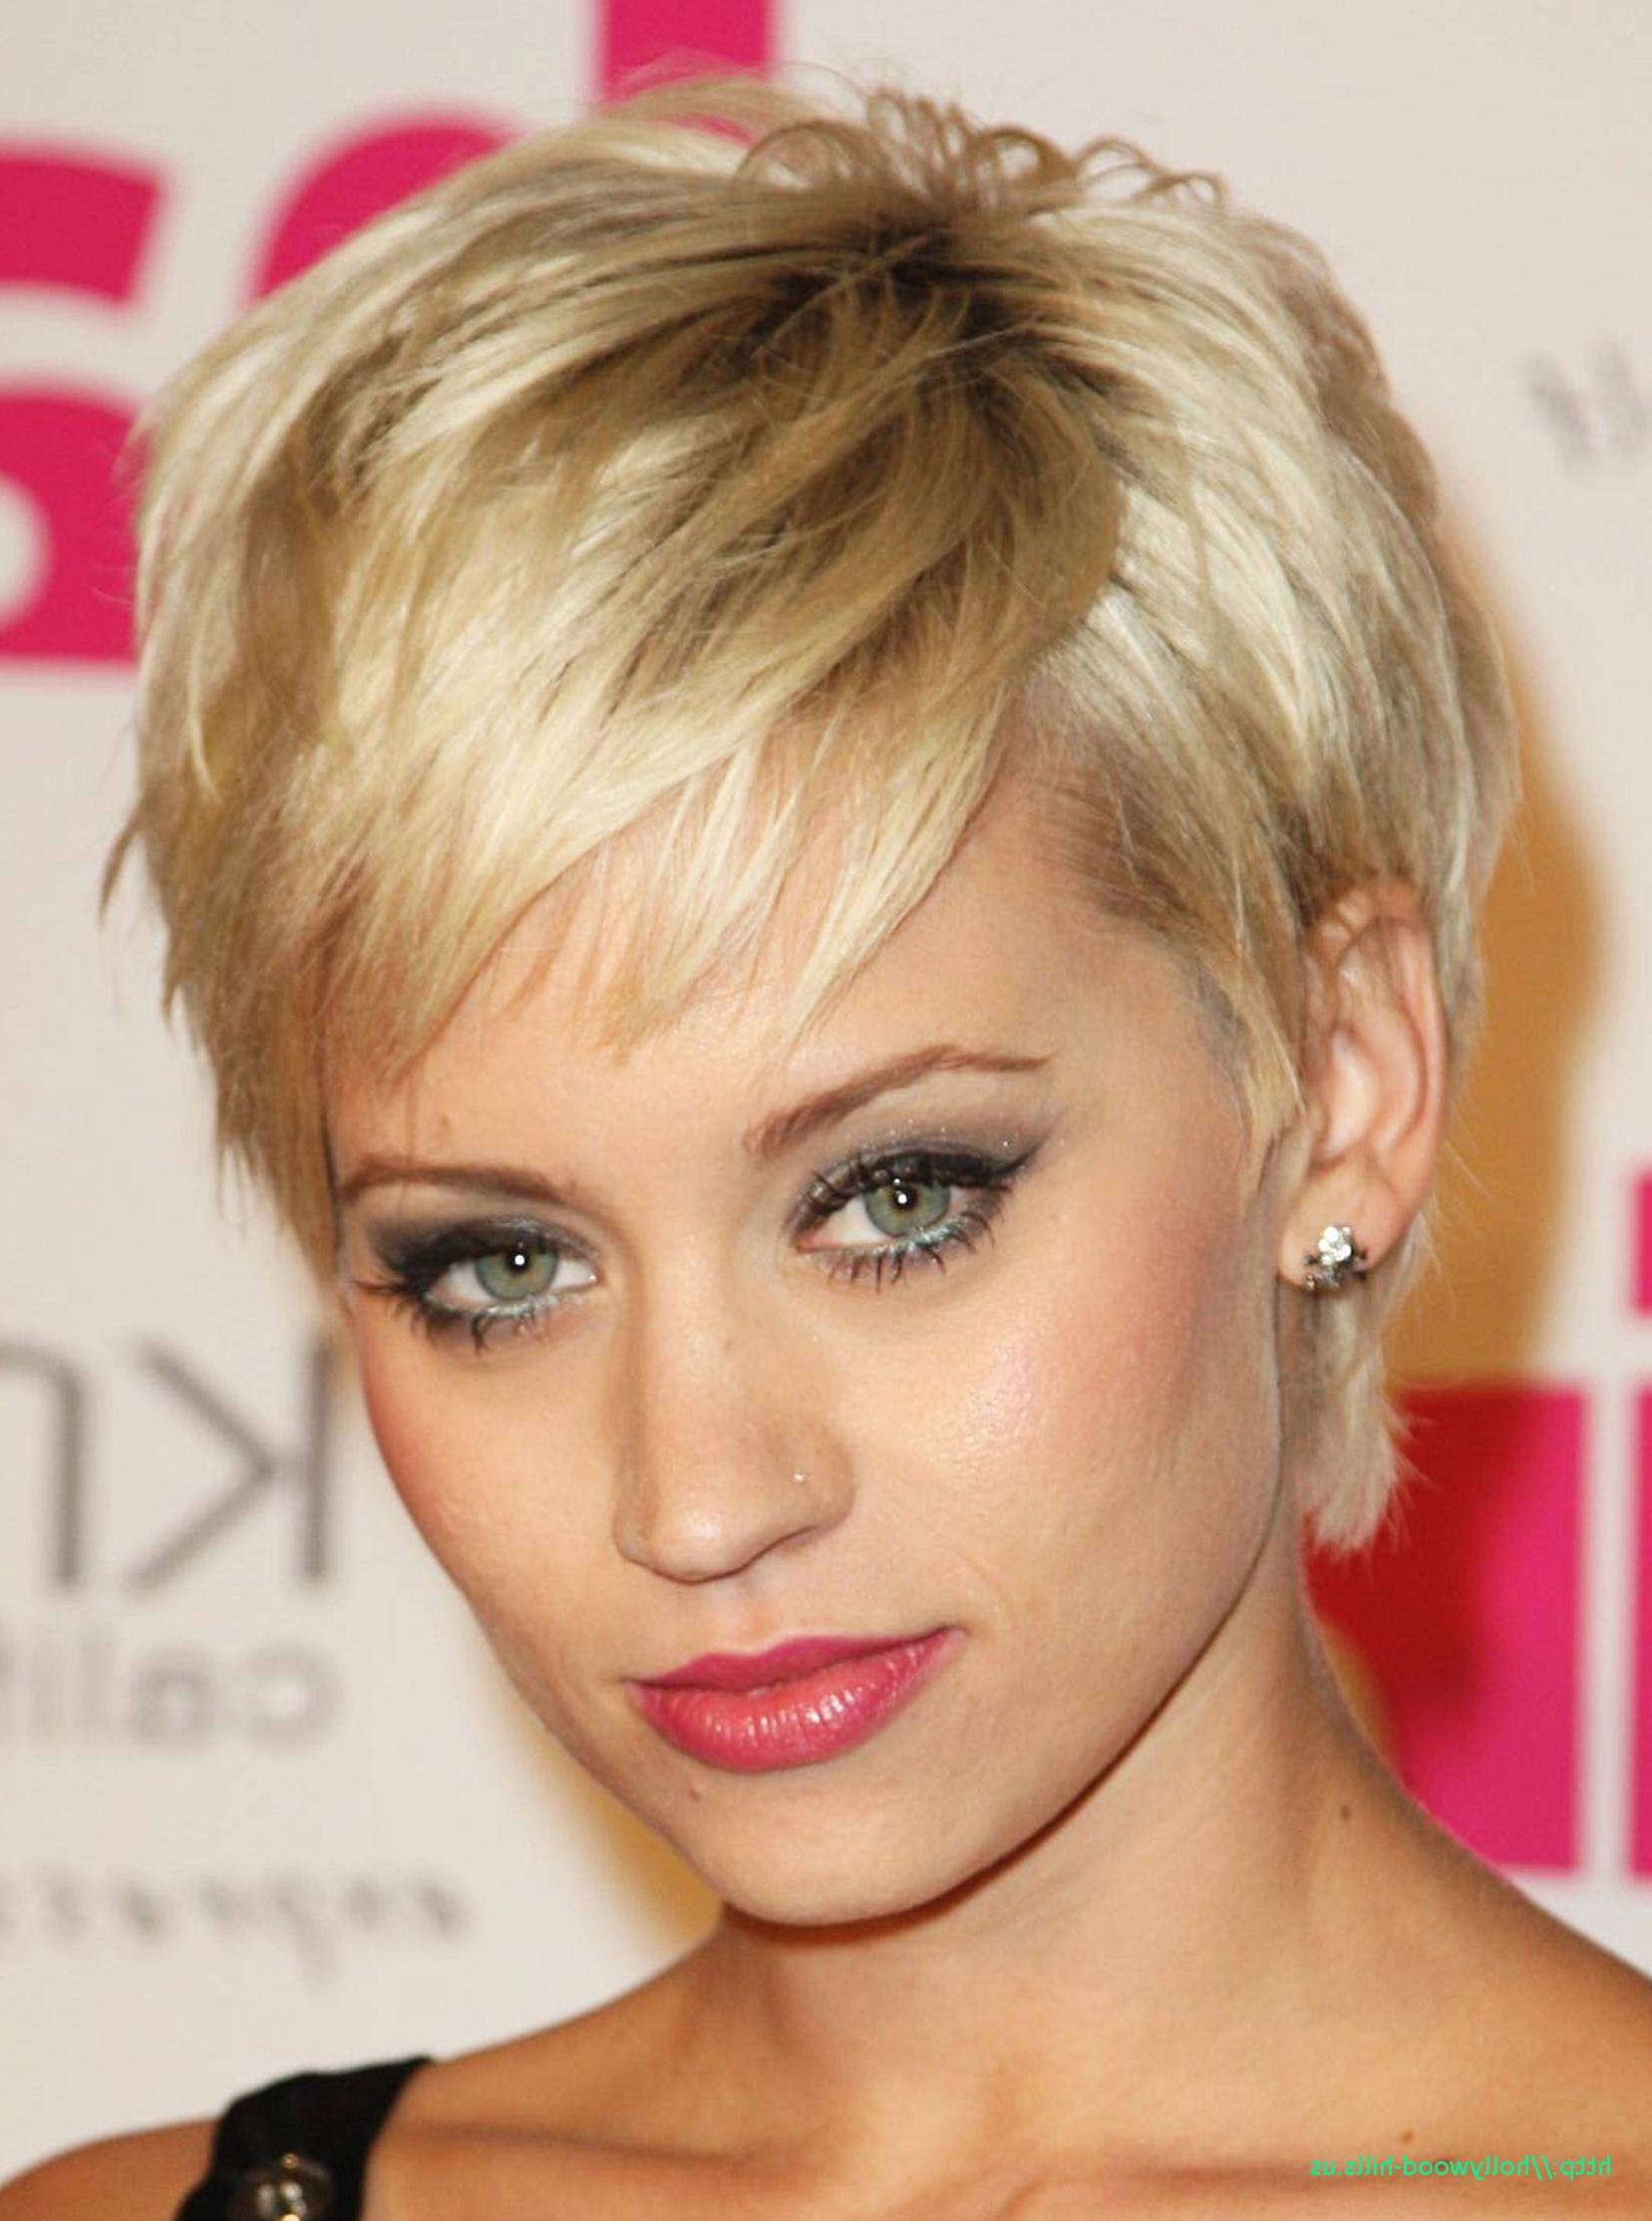 Blonde Hairstyles To Make You Look Younger Inspirational Short For Short Haircuts To Make You Look Younger (View 25 of 25)